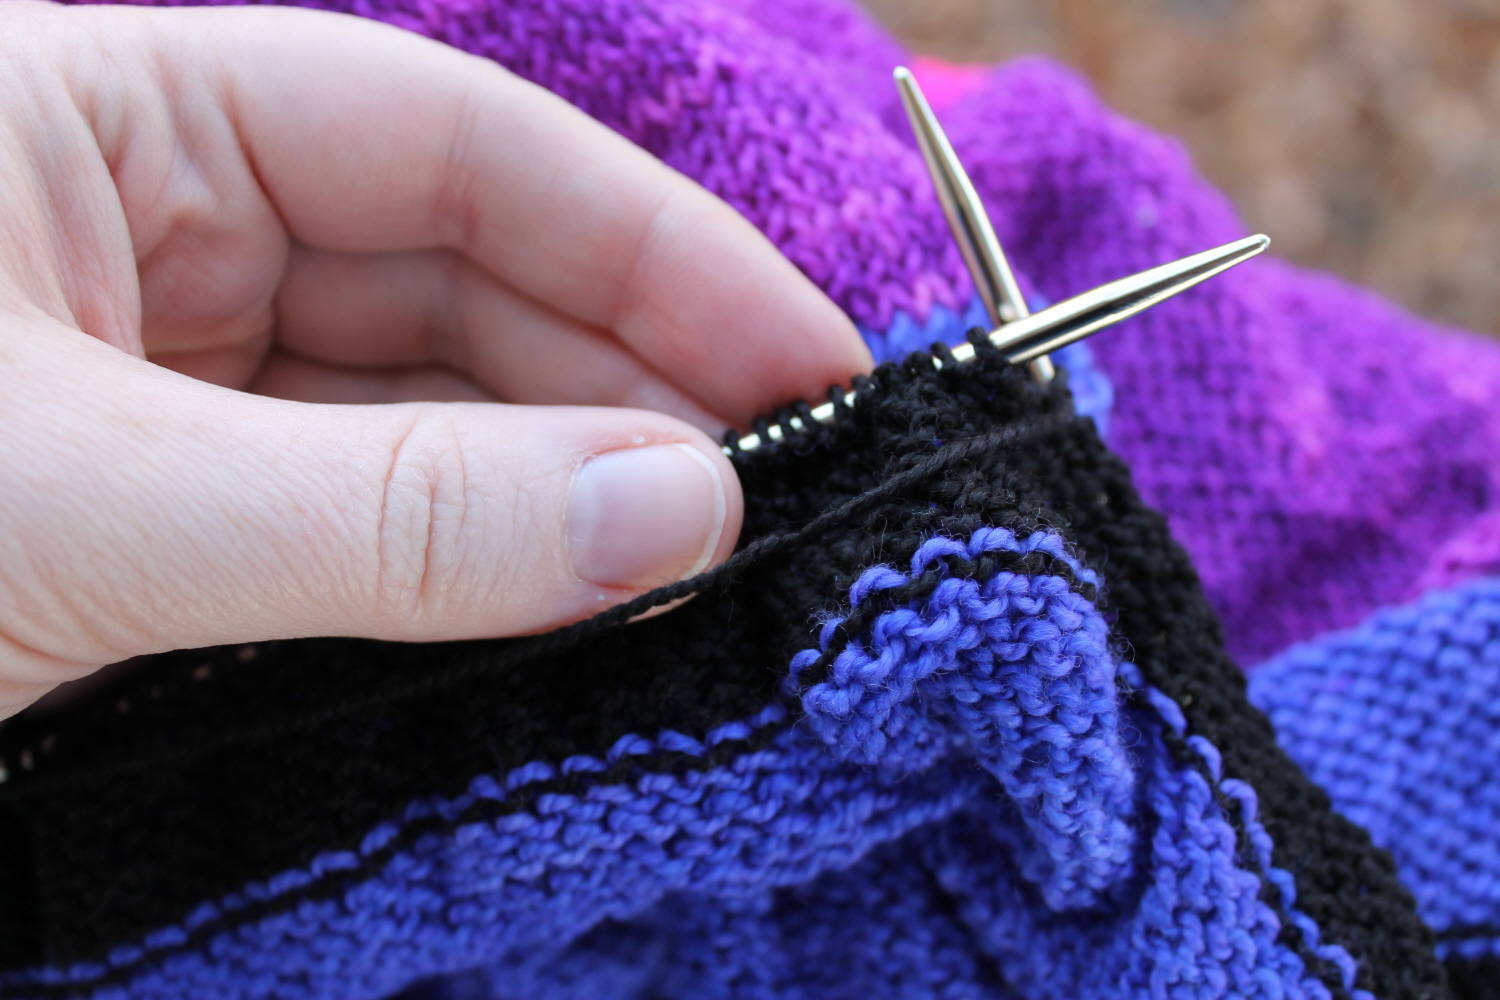 Knitting without looking at 
the stitches